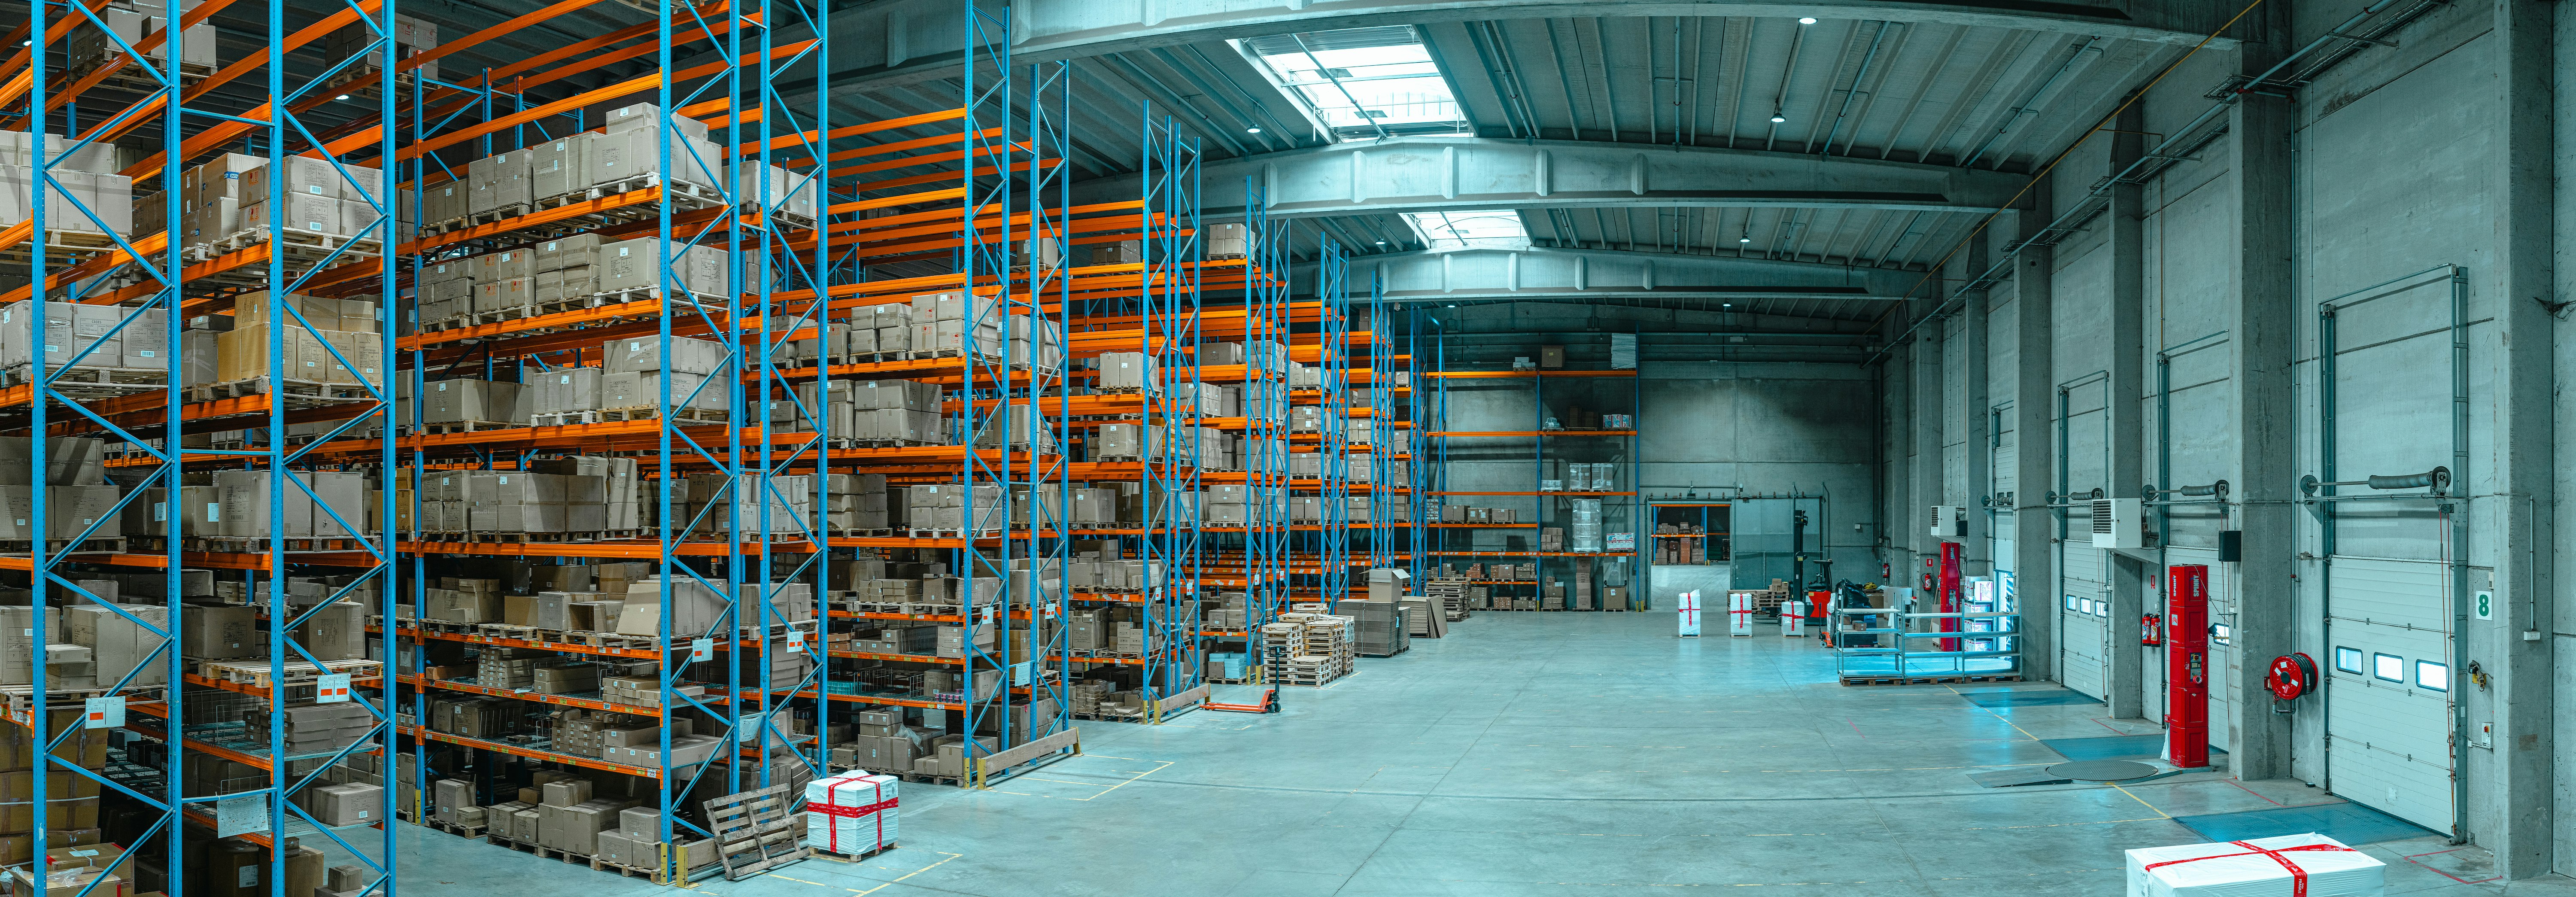 Warehouses Go for Automation